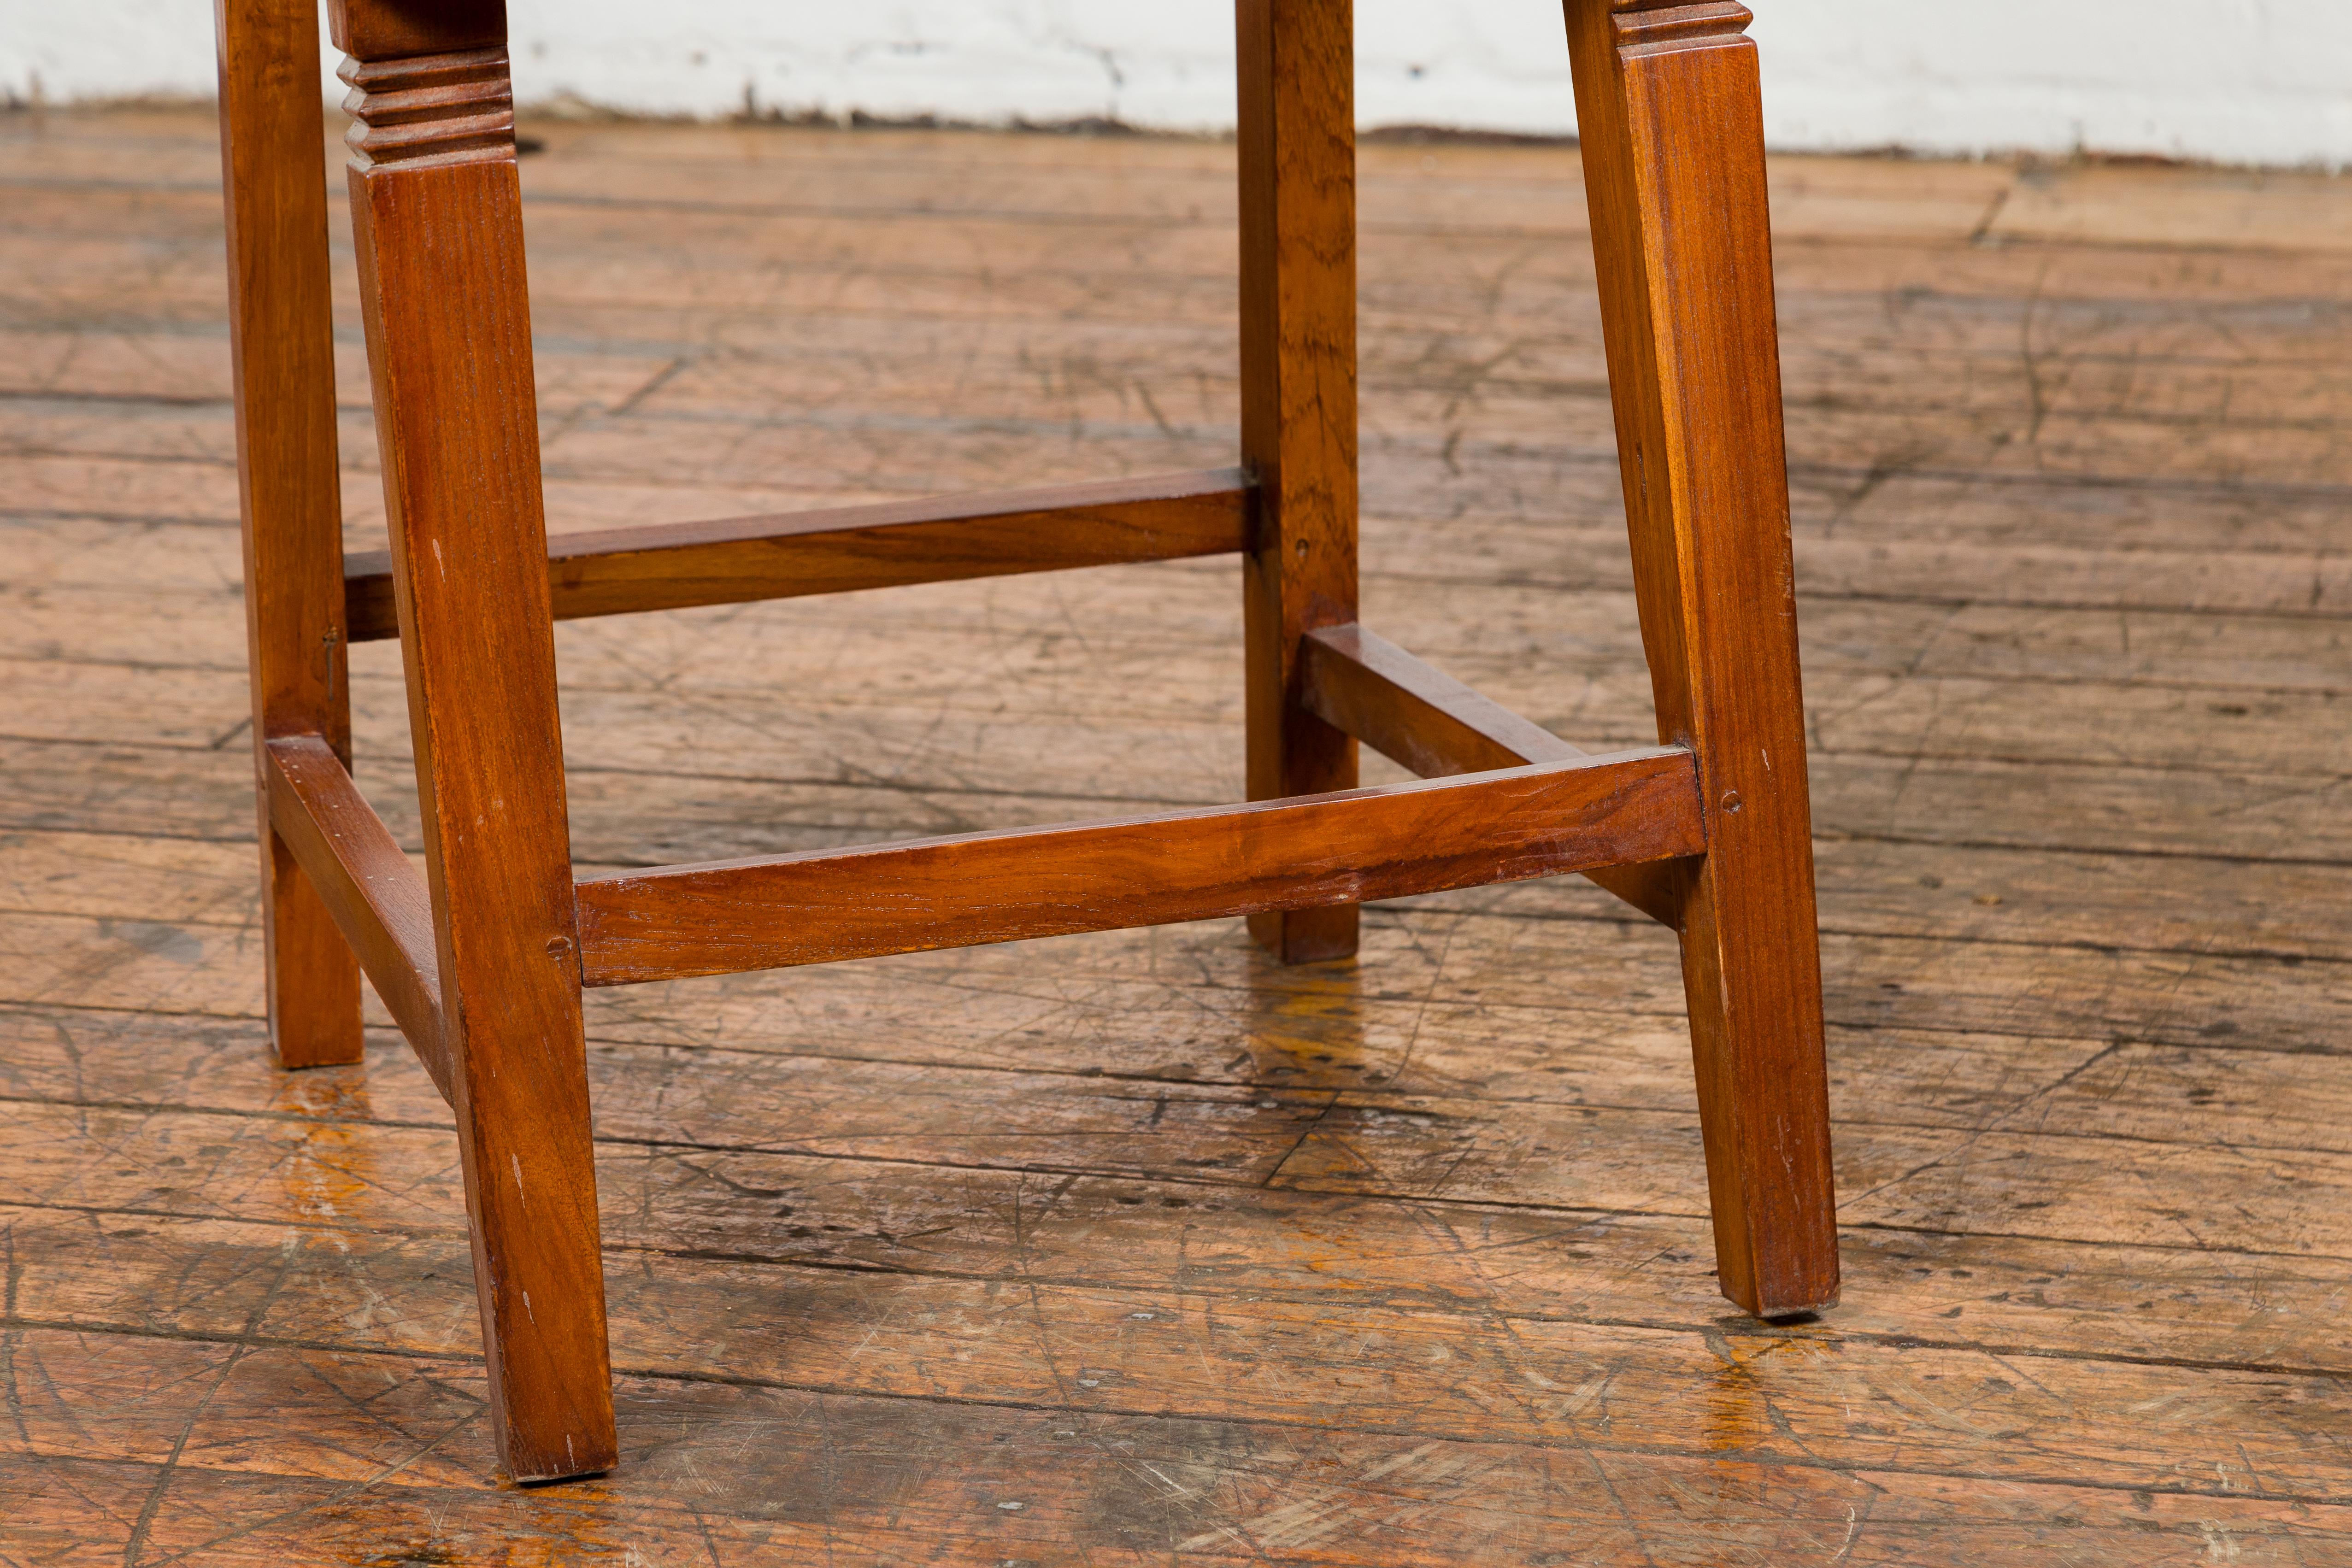 Wooden Side Chairs with Bamboo Slats, Distressed Finish and Tapered Legs, a Pair For Sale 1